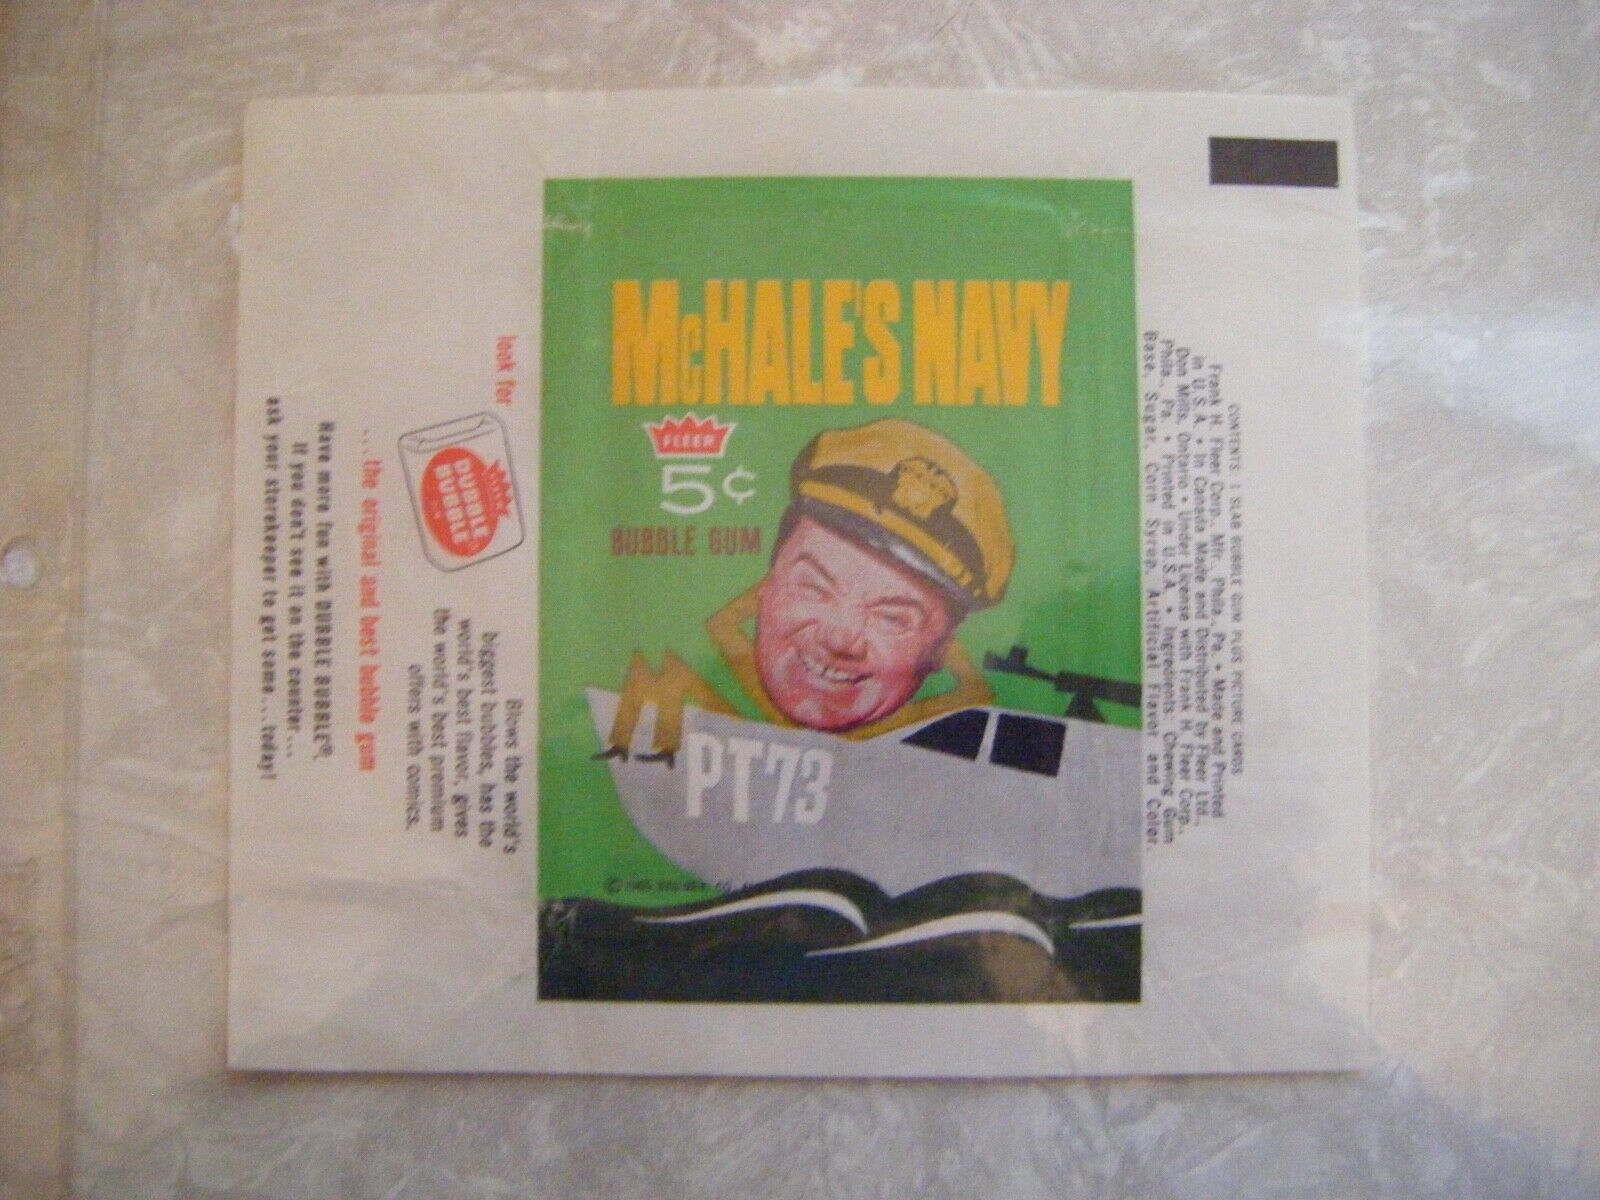 1965 Fleer McHales Navy Complete Set of 66 Cards with Wrapper - High Grade NM-MT